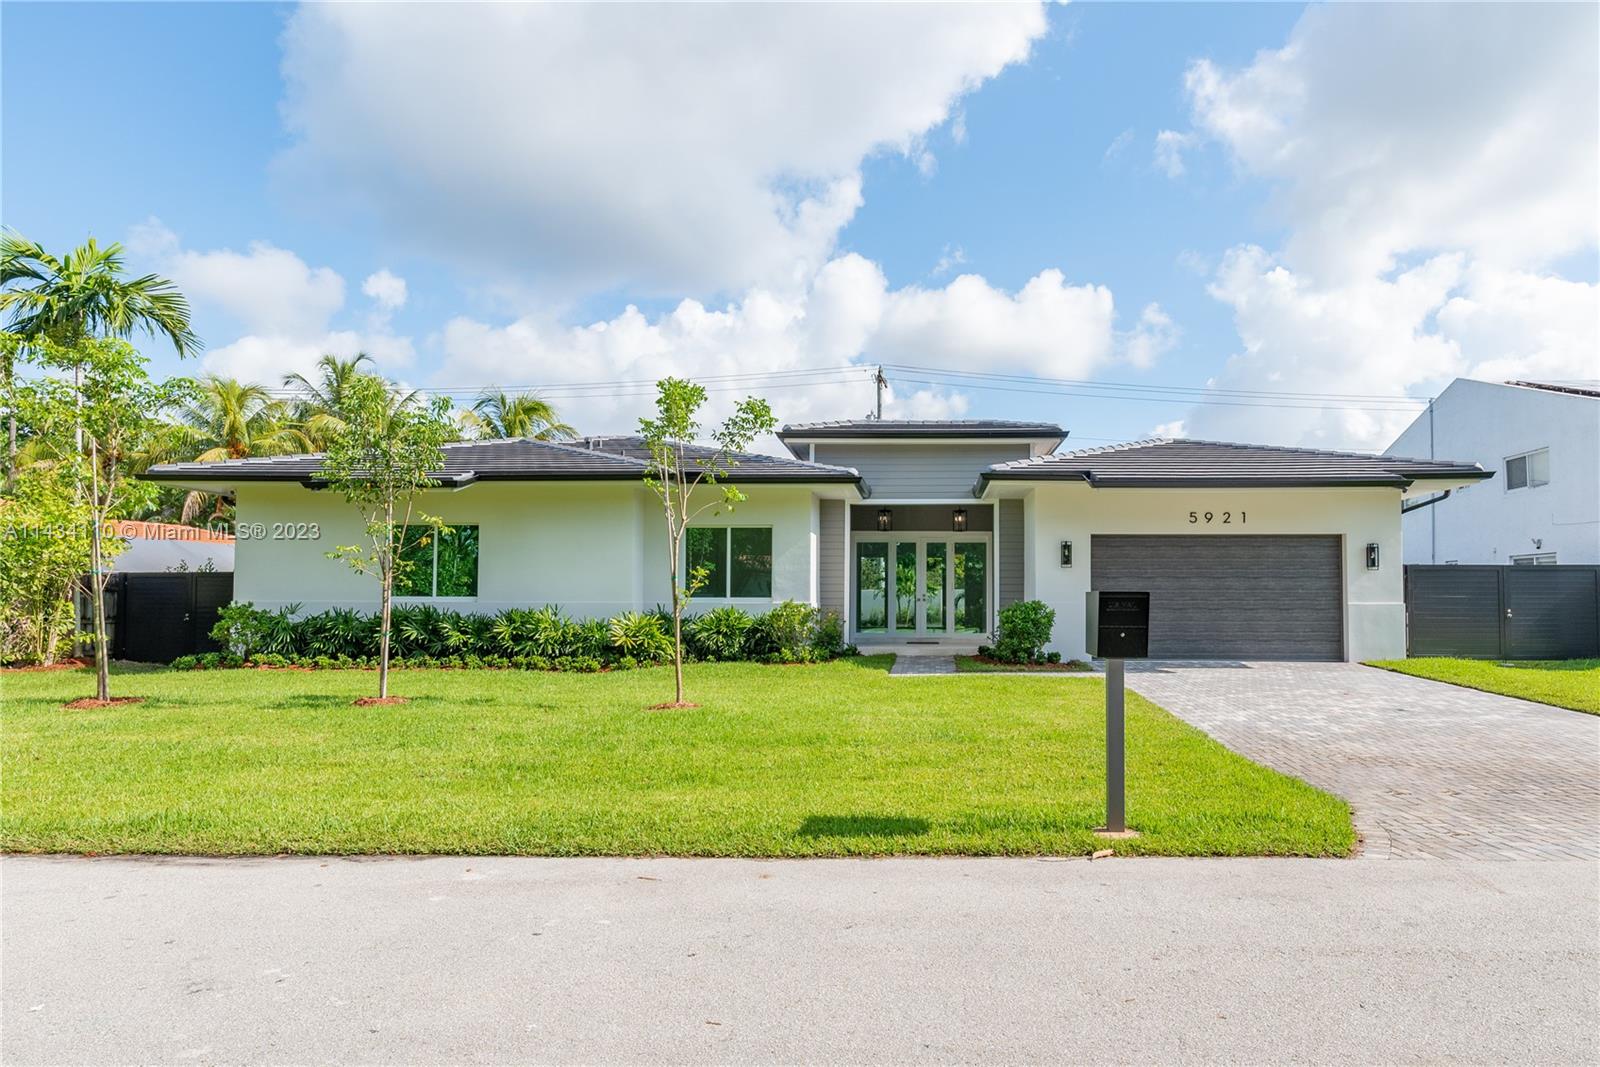 Be the first to live in this solar energy plus smart home in Gables Edge. Just completed Summer 2023, this 4 -bedroom, 3- bathroom home offers adaptable rooms, high ceiling and rich natural light. Upon entrance, you are warmly greeted by limestone floors, and a bright and open floor plan seamlessly connecting the chefs kitchen to the living room and leading to the inviting, sunny backyard and heated pool with bench spa. Meticulous attention to detail is presented in the kitchen with quartz countertops, floor to ceiling custom solid wood cabinets, and high end appliances. The practical well-equipped large laundry room and roomy 2 car garage make this new home a joy. Live luxuriously in an ultra-quiet neighborhood in a privileged location.